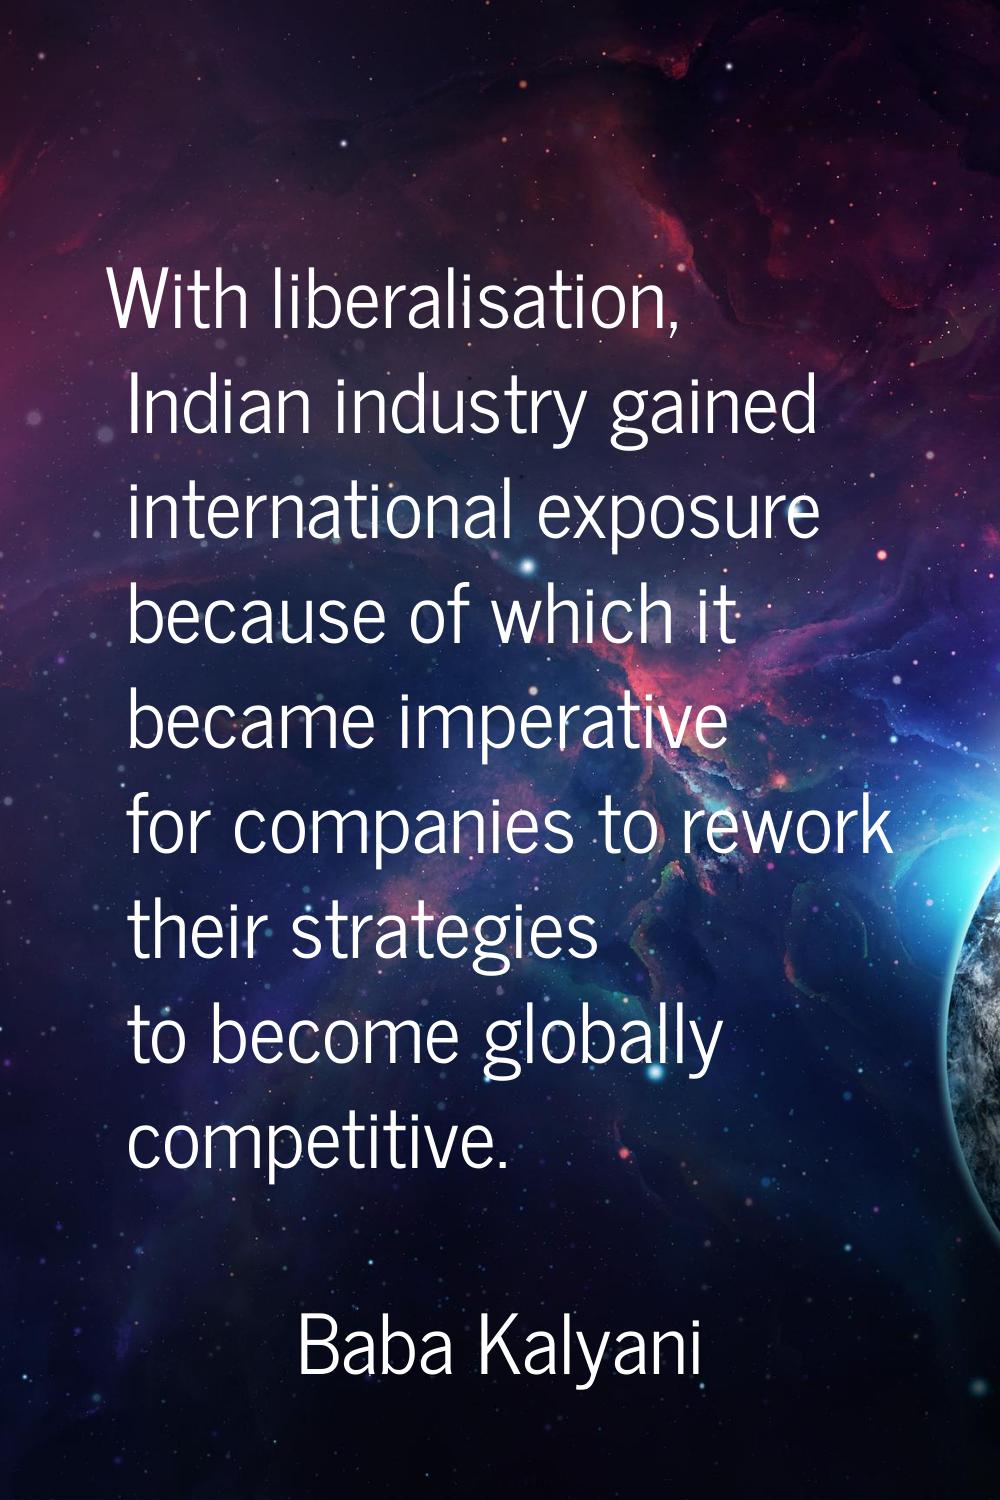 With liberalisation, Indian industry gained international exposure because of which it became imper